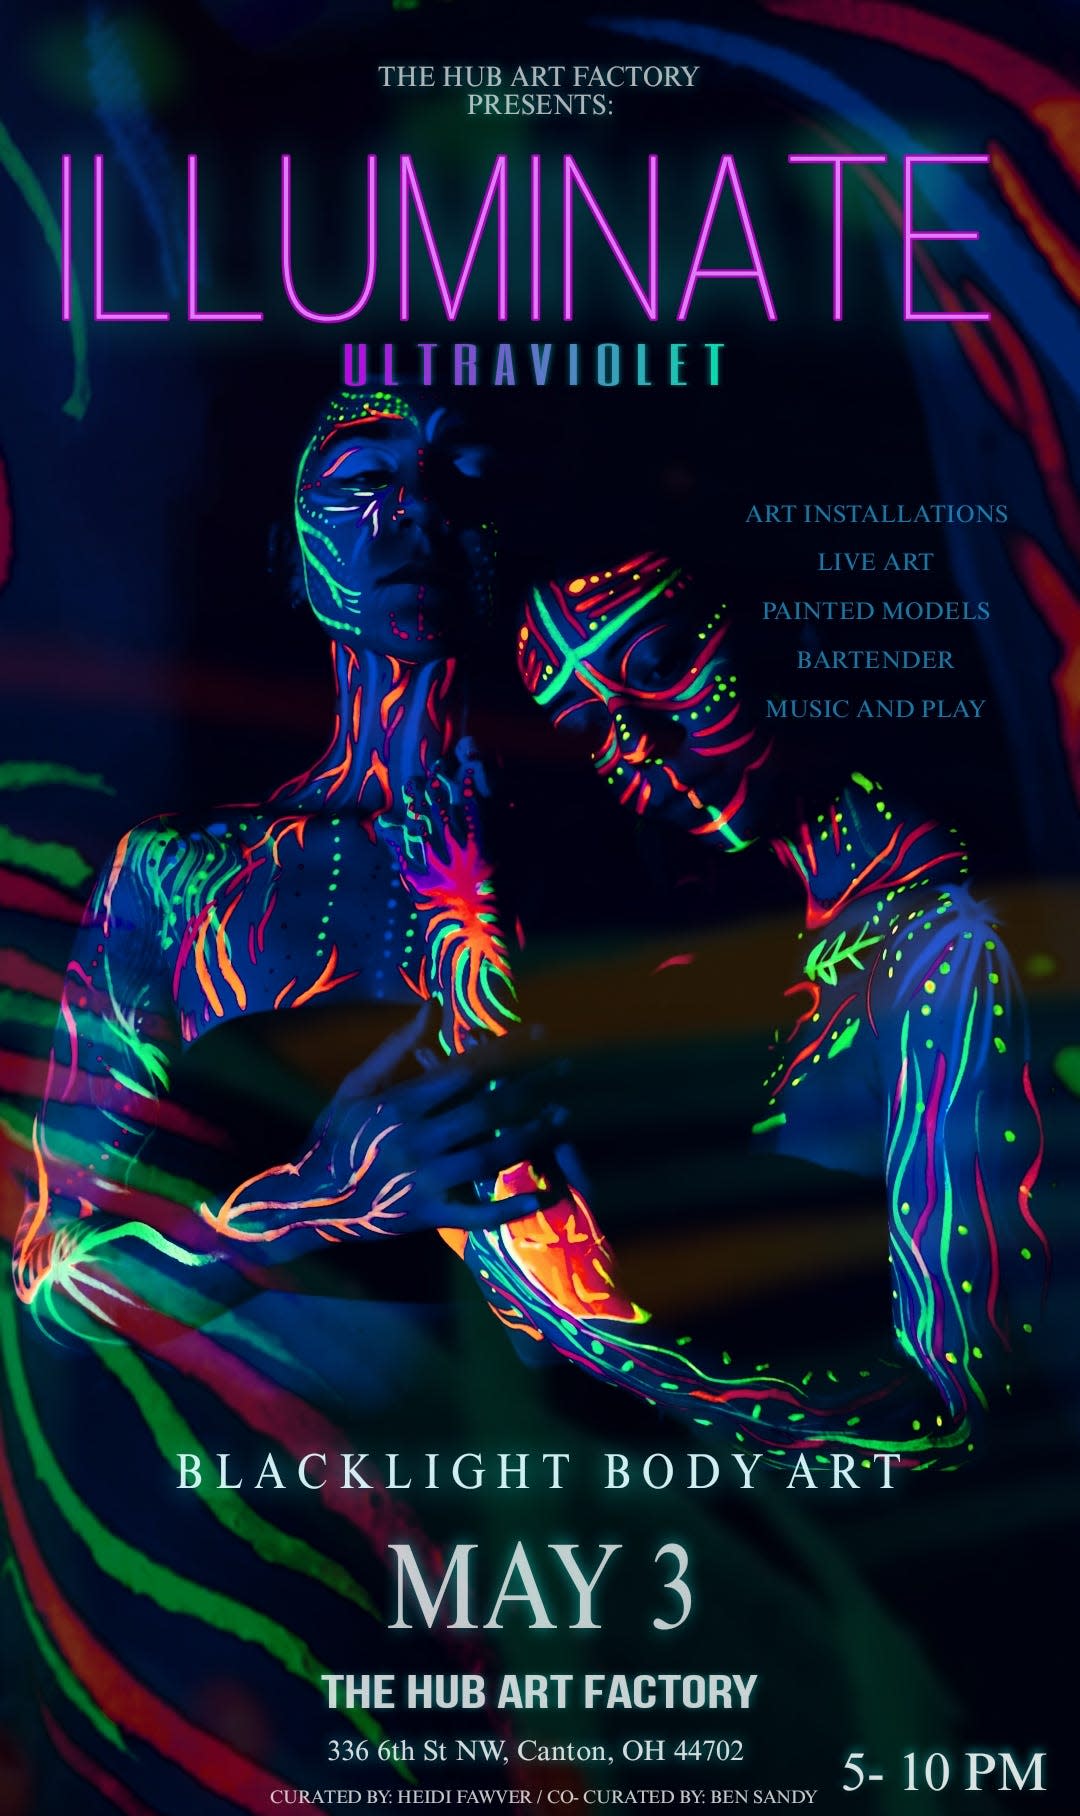 Canton artist Heidi Fawver will present the "Illuminate 2: Ultraviolet" art show Friday night at The Hub Art Factory in downtown Canton, featuring models in body paint with glow-in-the-dark effects.